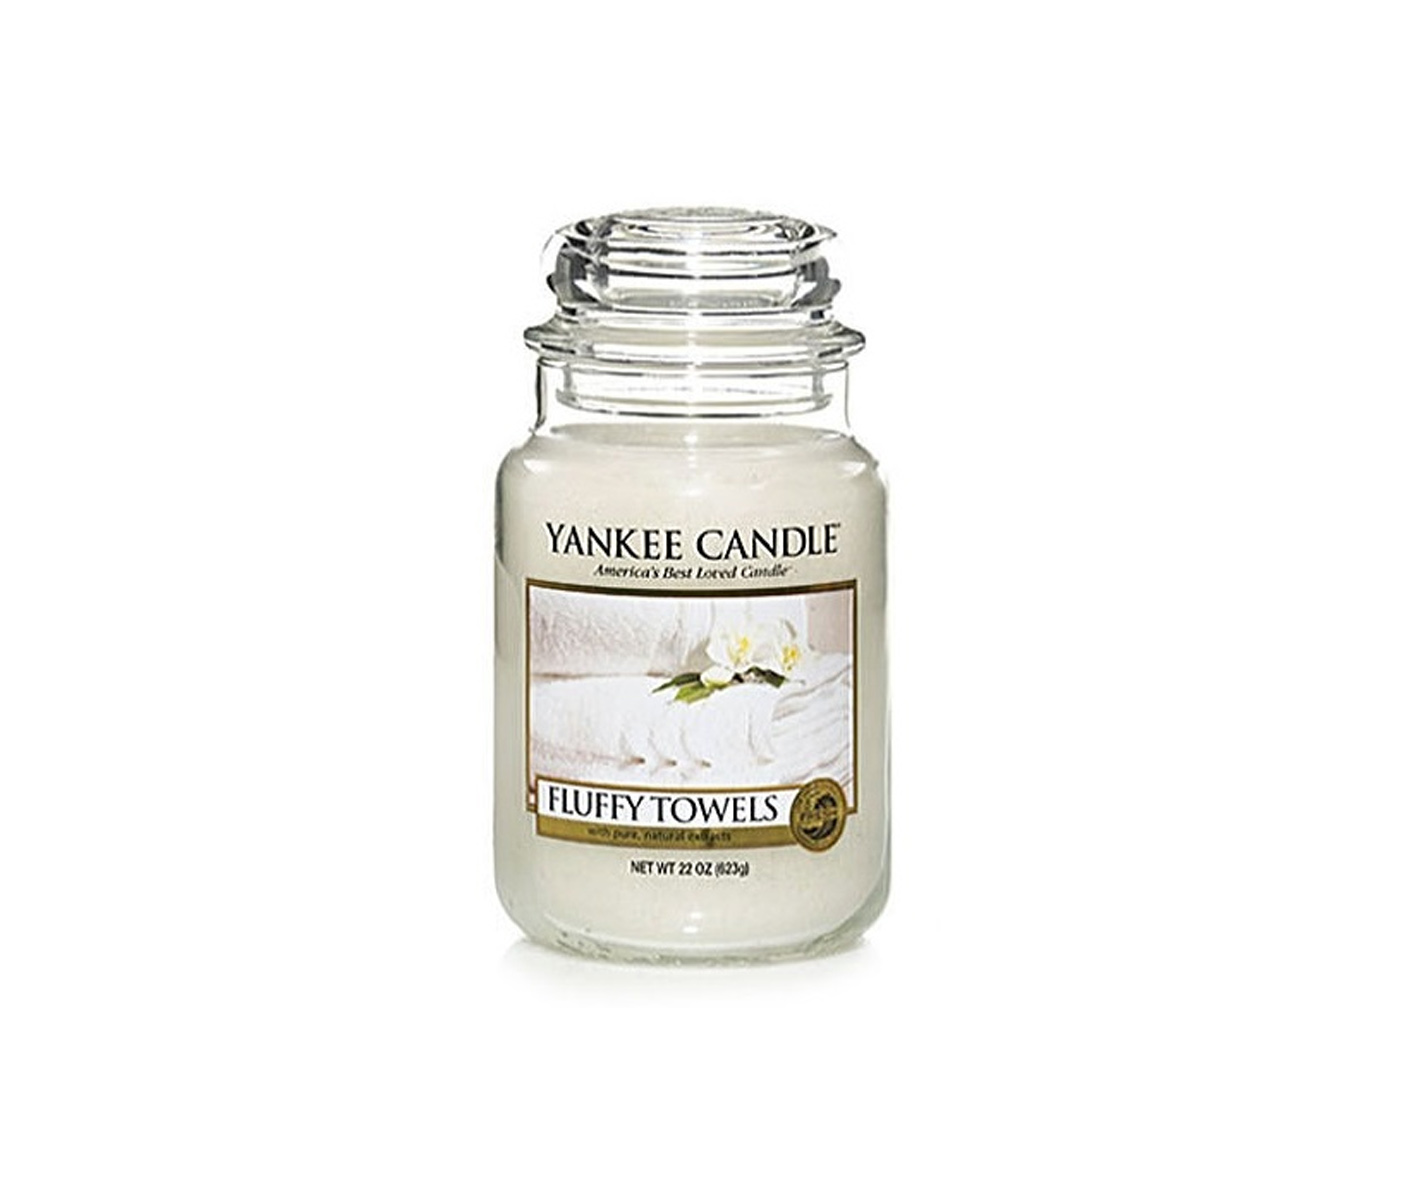 Yankee Candle, Fluffy Towels